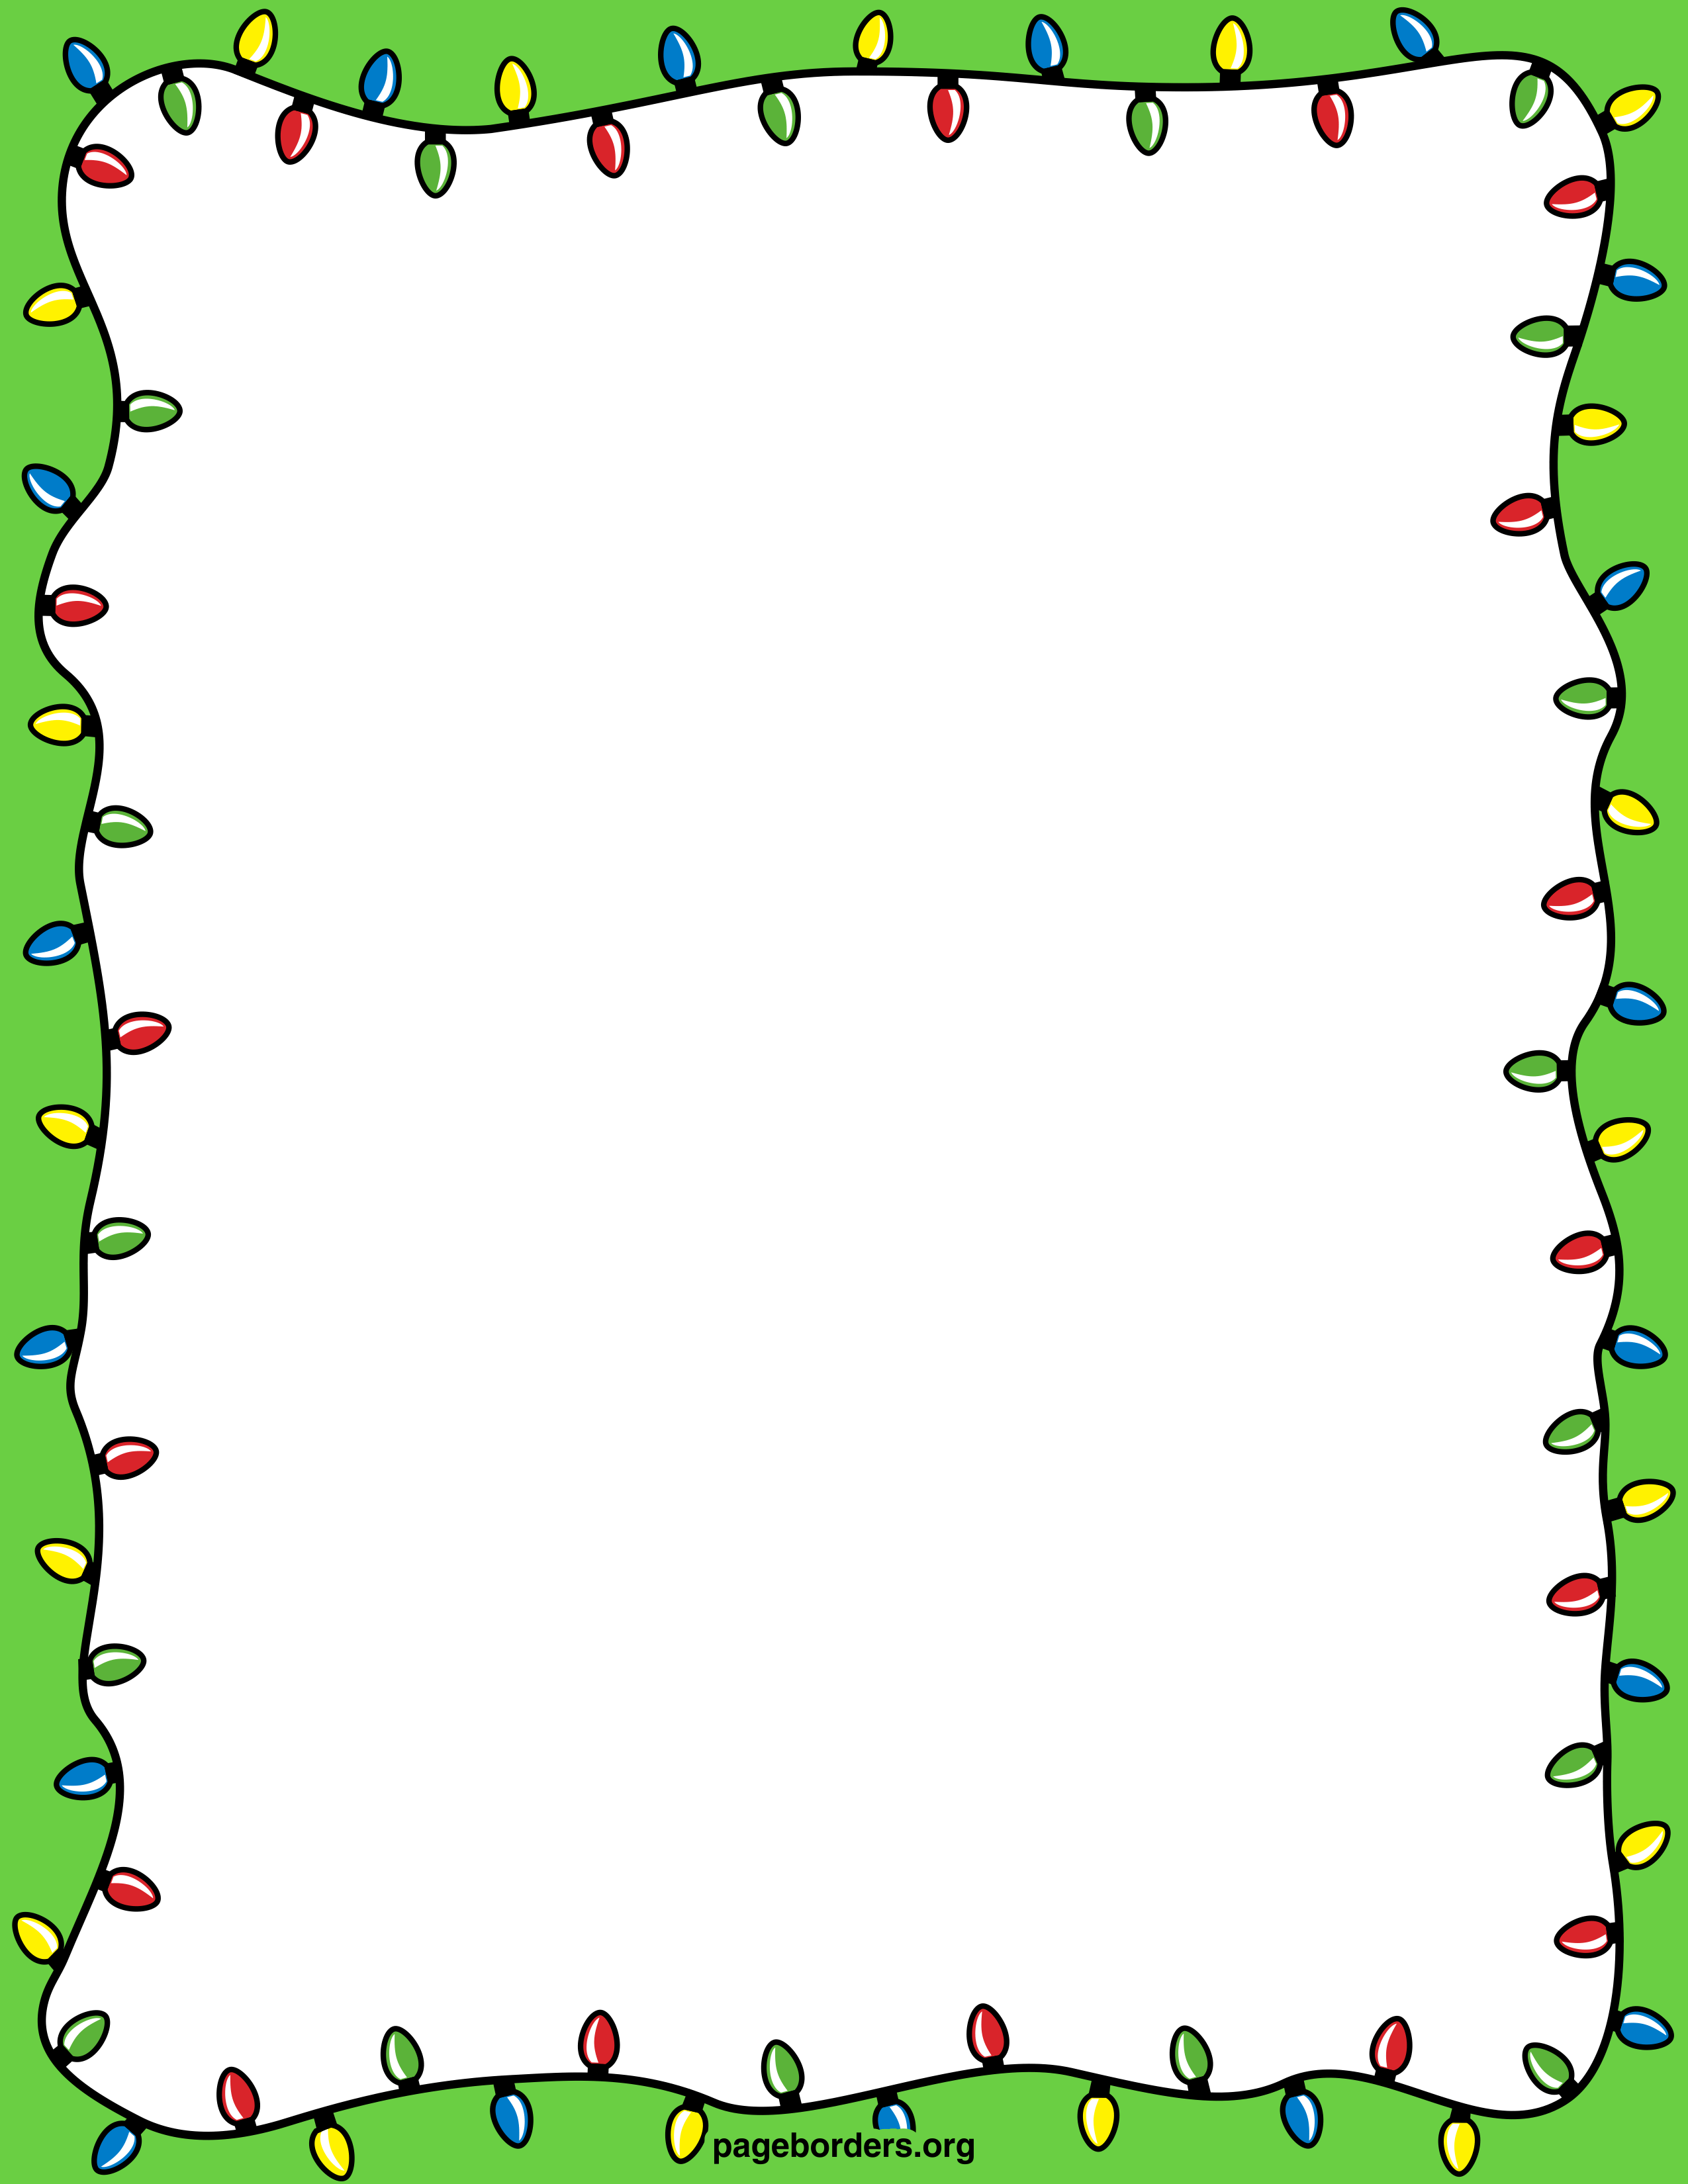 Christmas clipart page borders